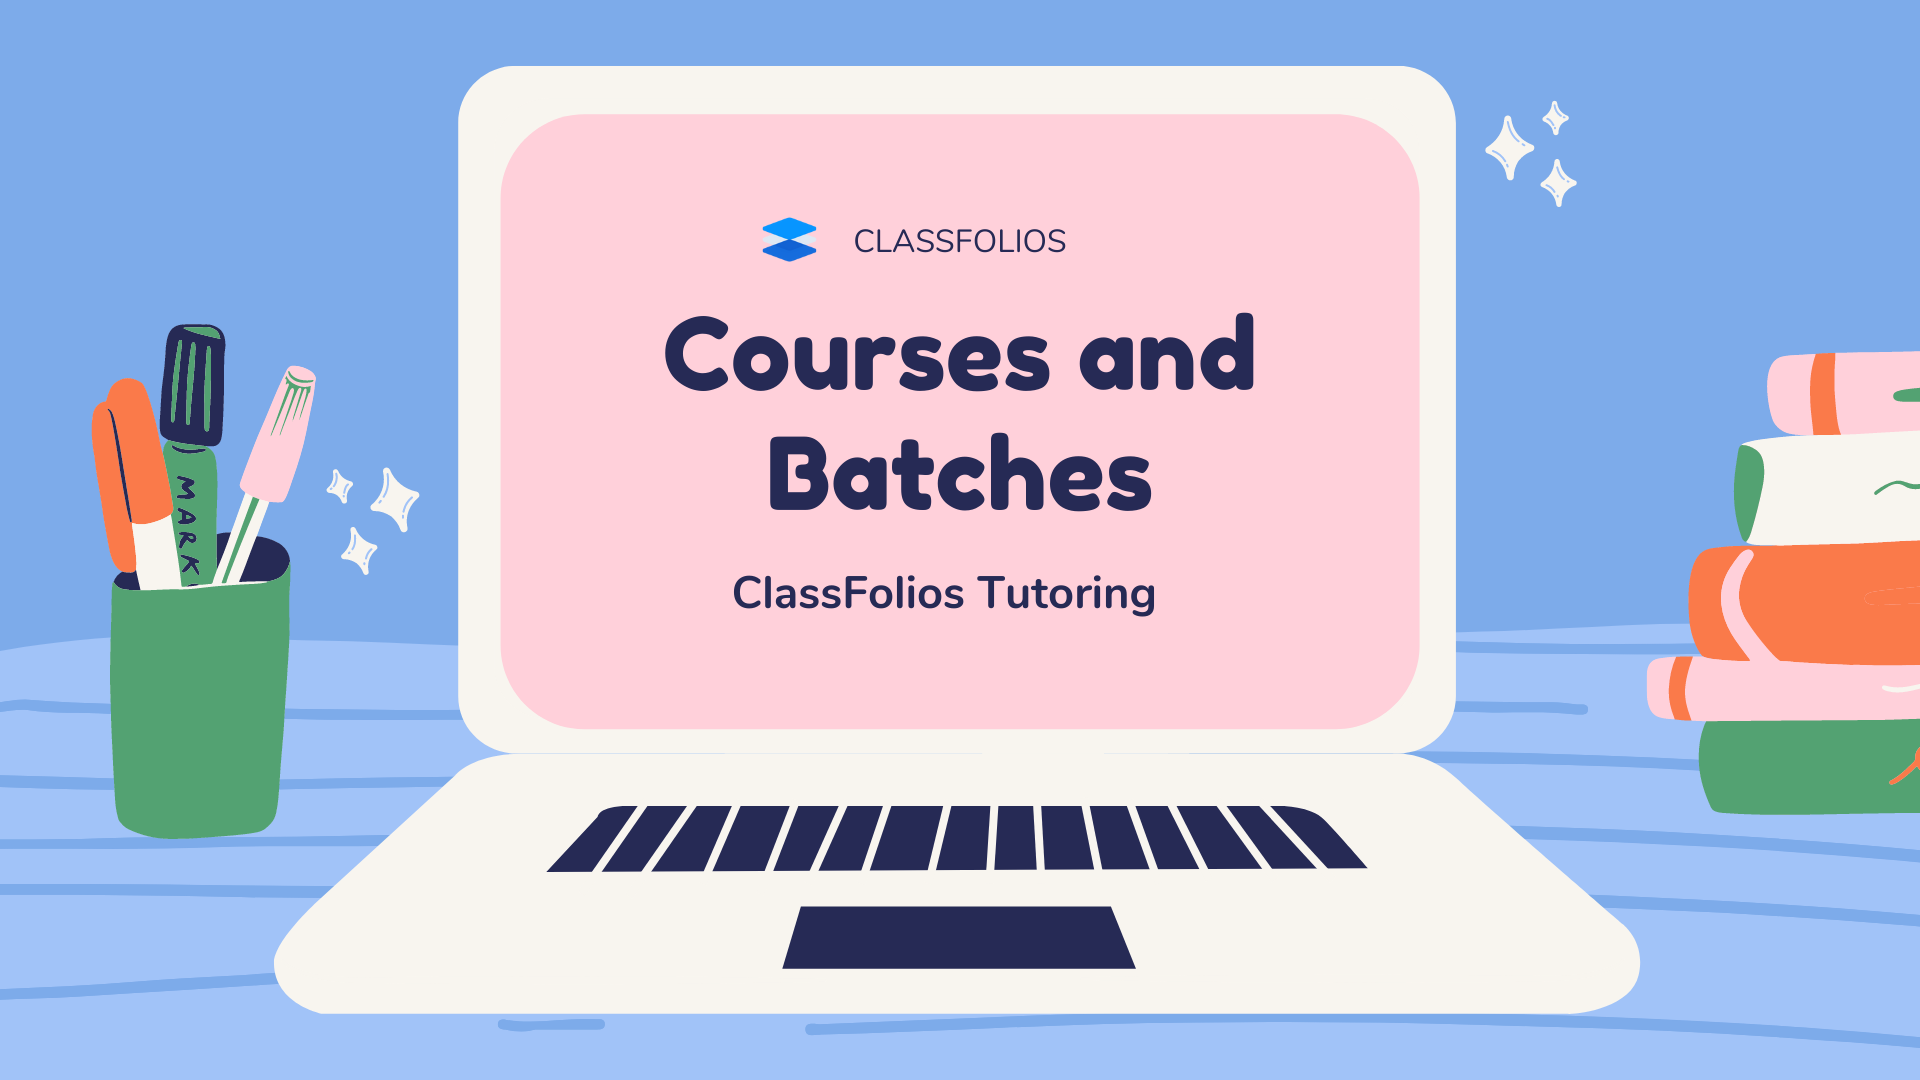 Courses and Batches in ClassFolios